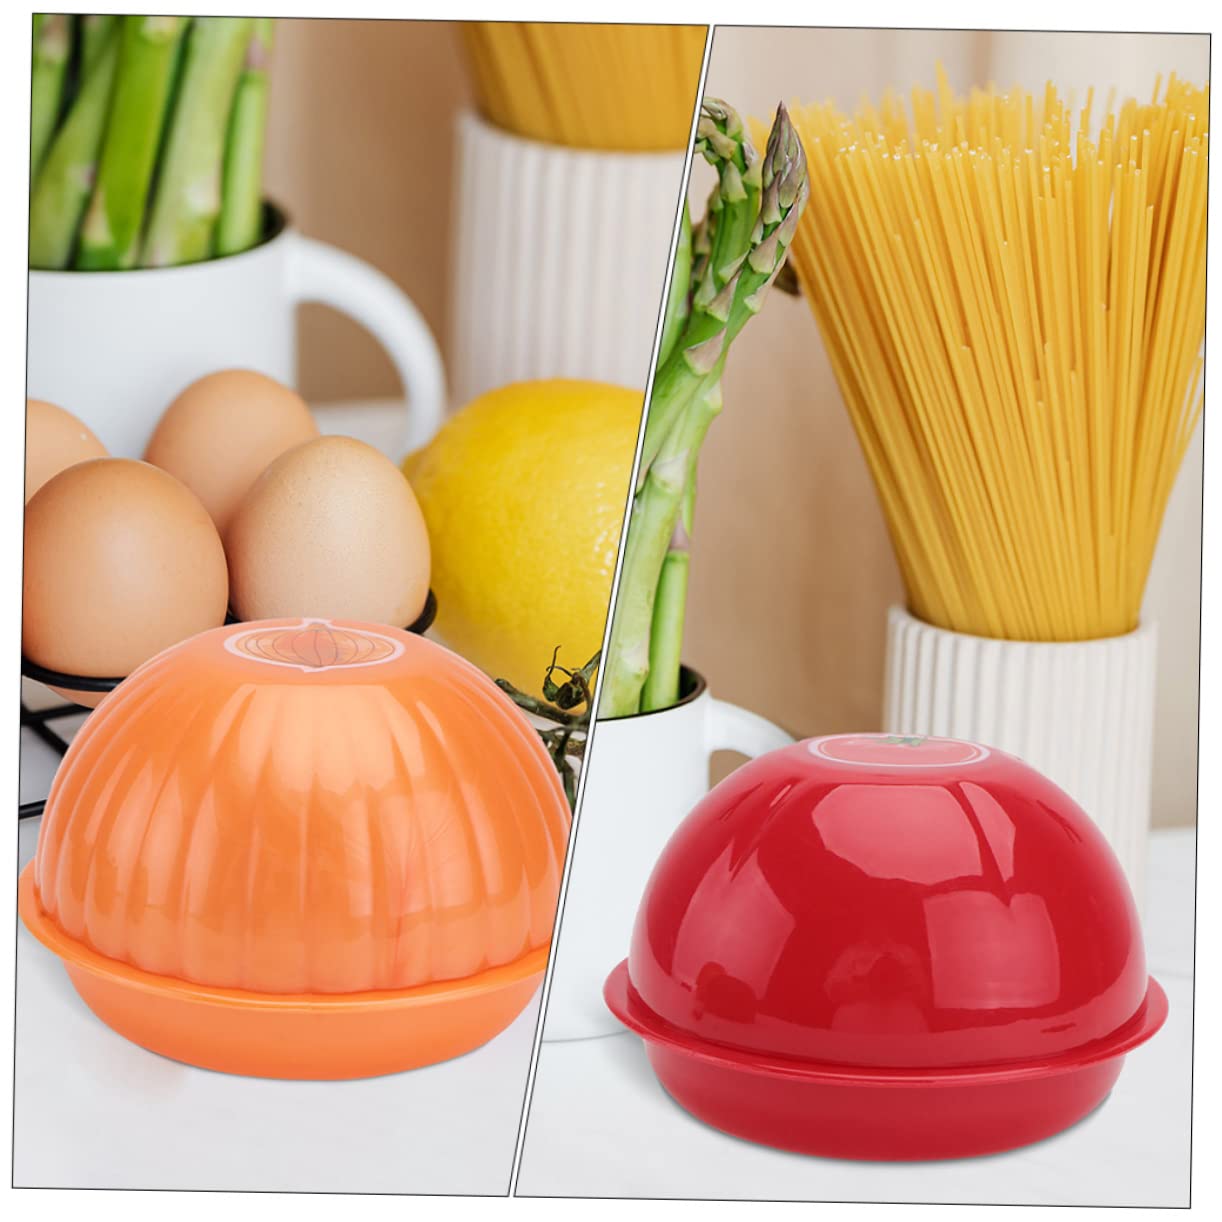 Zerodeko 12 Pcs Vegetable Preservation Bowl Onion Keeper Holder Fruit Vegetable Saver Vegetable Produce Saver Pepper Onion Storage Container Onion and Saver Fruit Container Plastic Salad